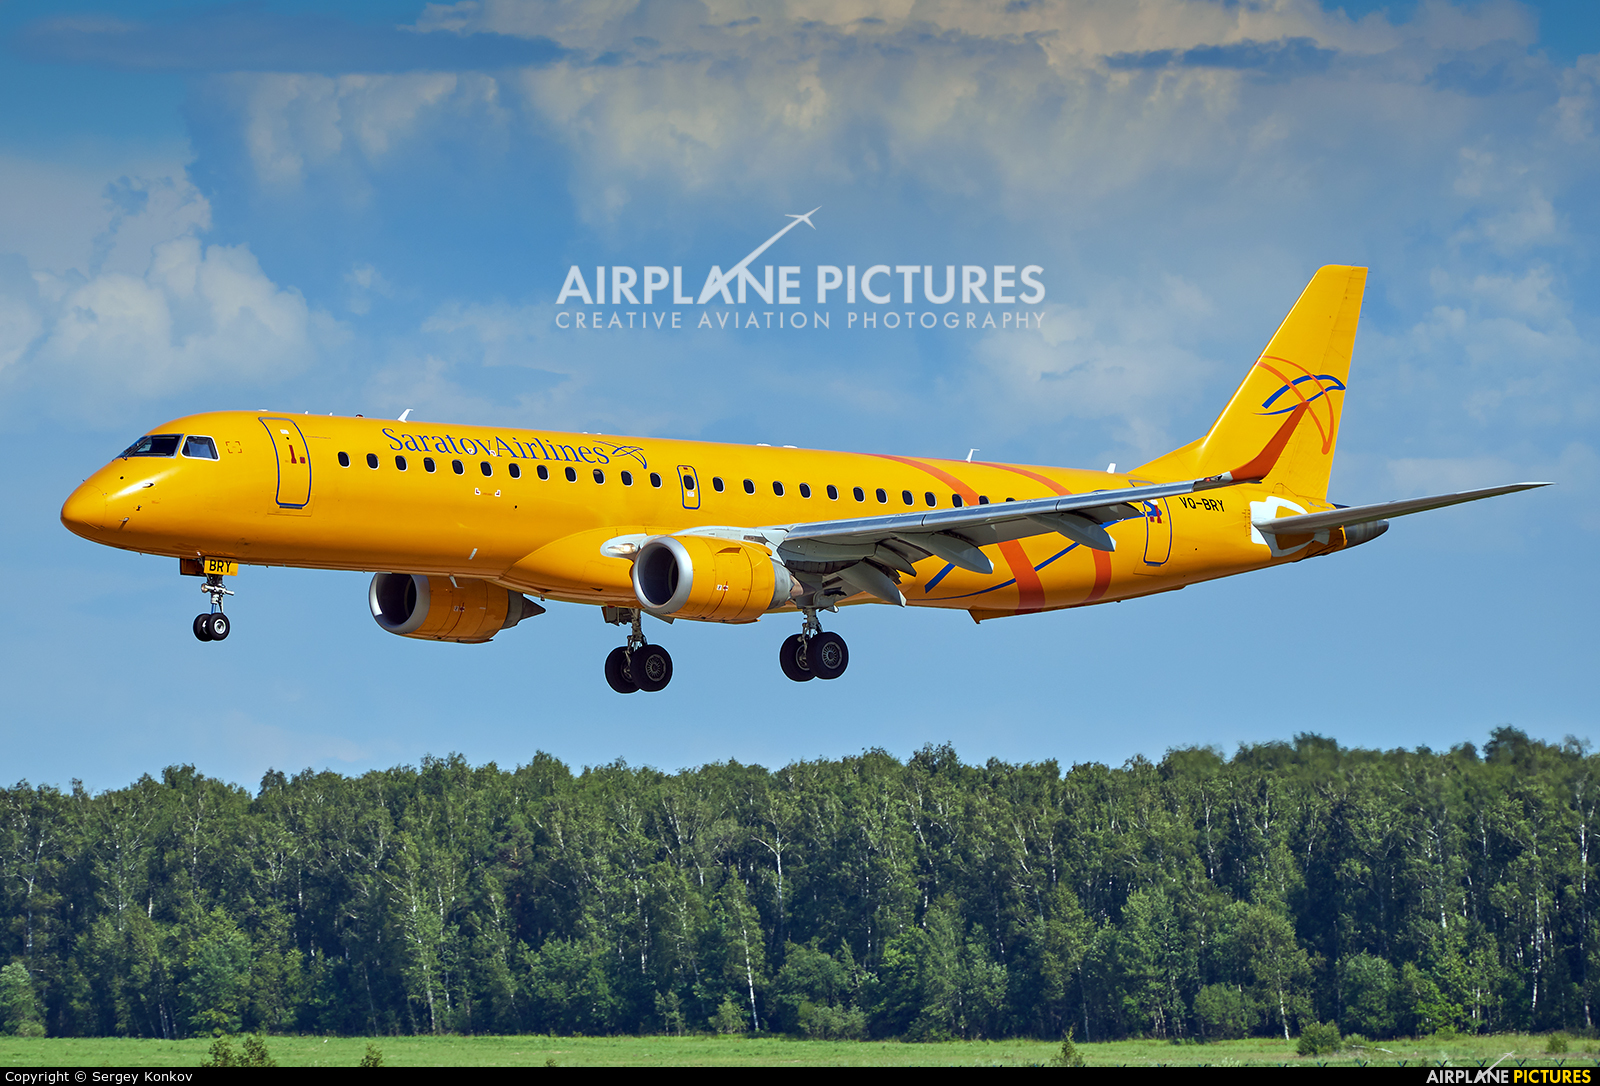 Saratov Airlines VQ-BRY aircraft at Moscow - Domodedovo